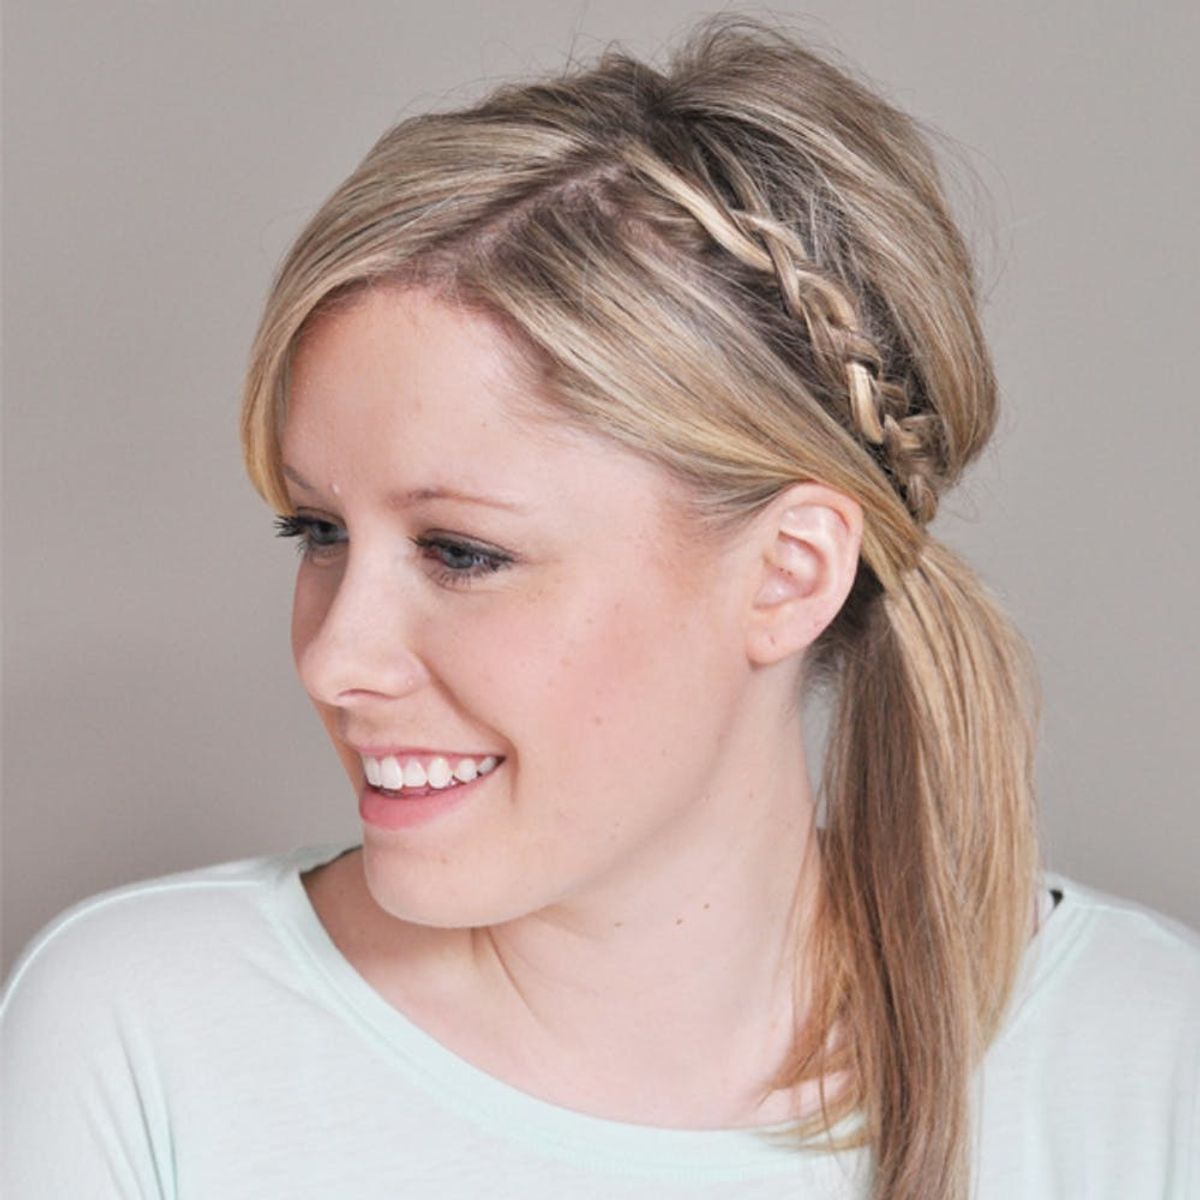 14 Ridiculously Easy 5-Minute Braided Hairstyles